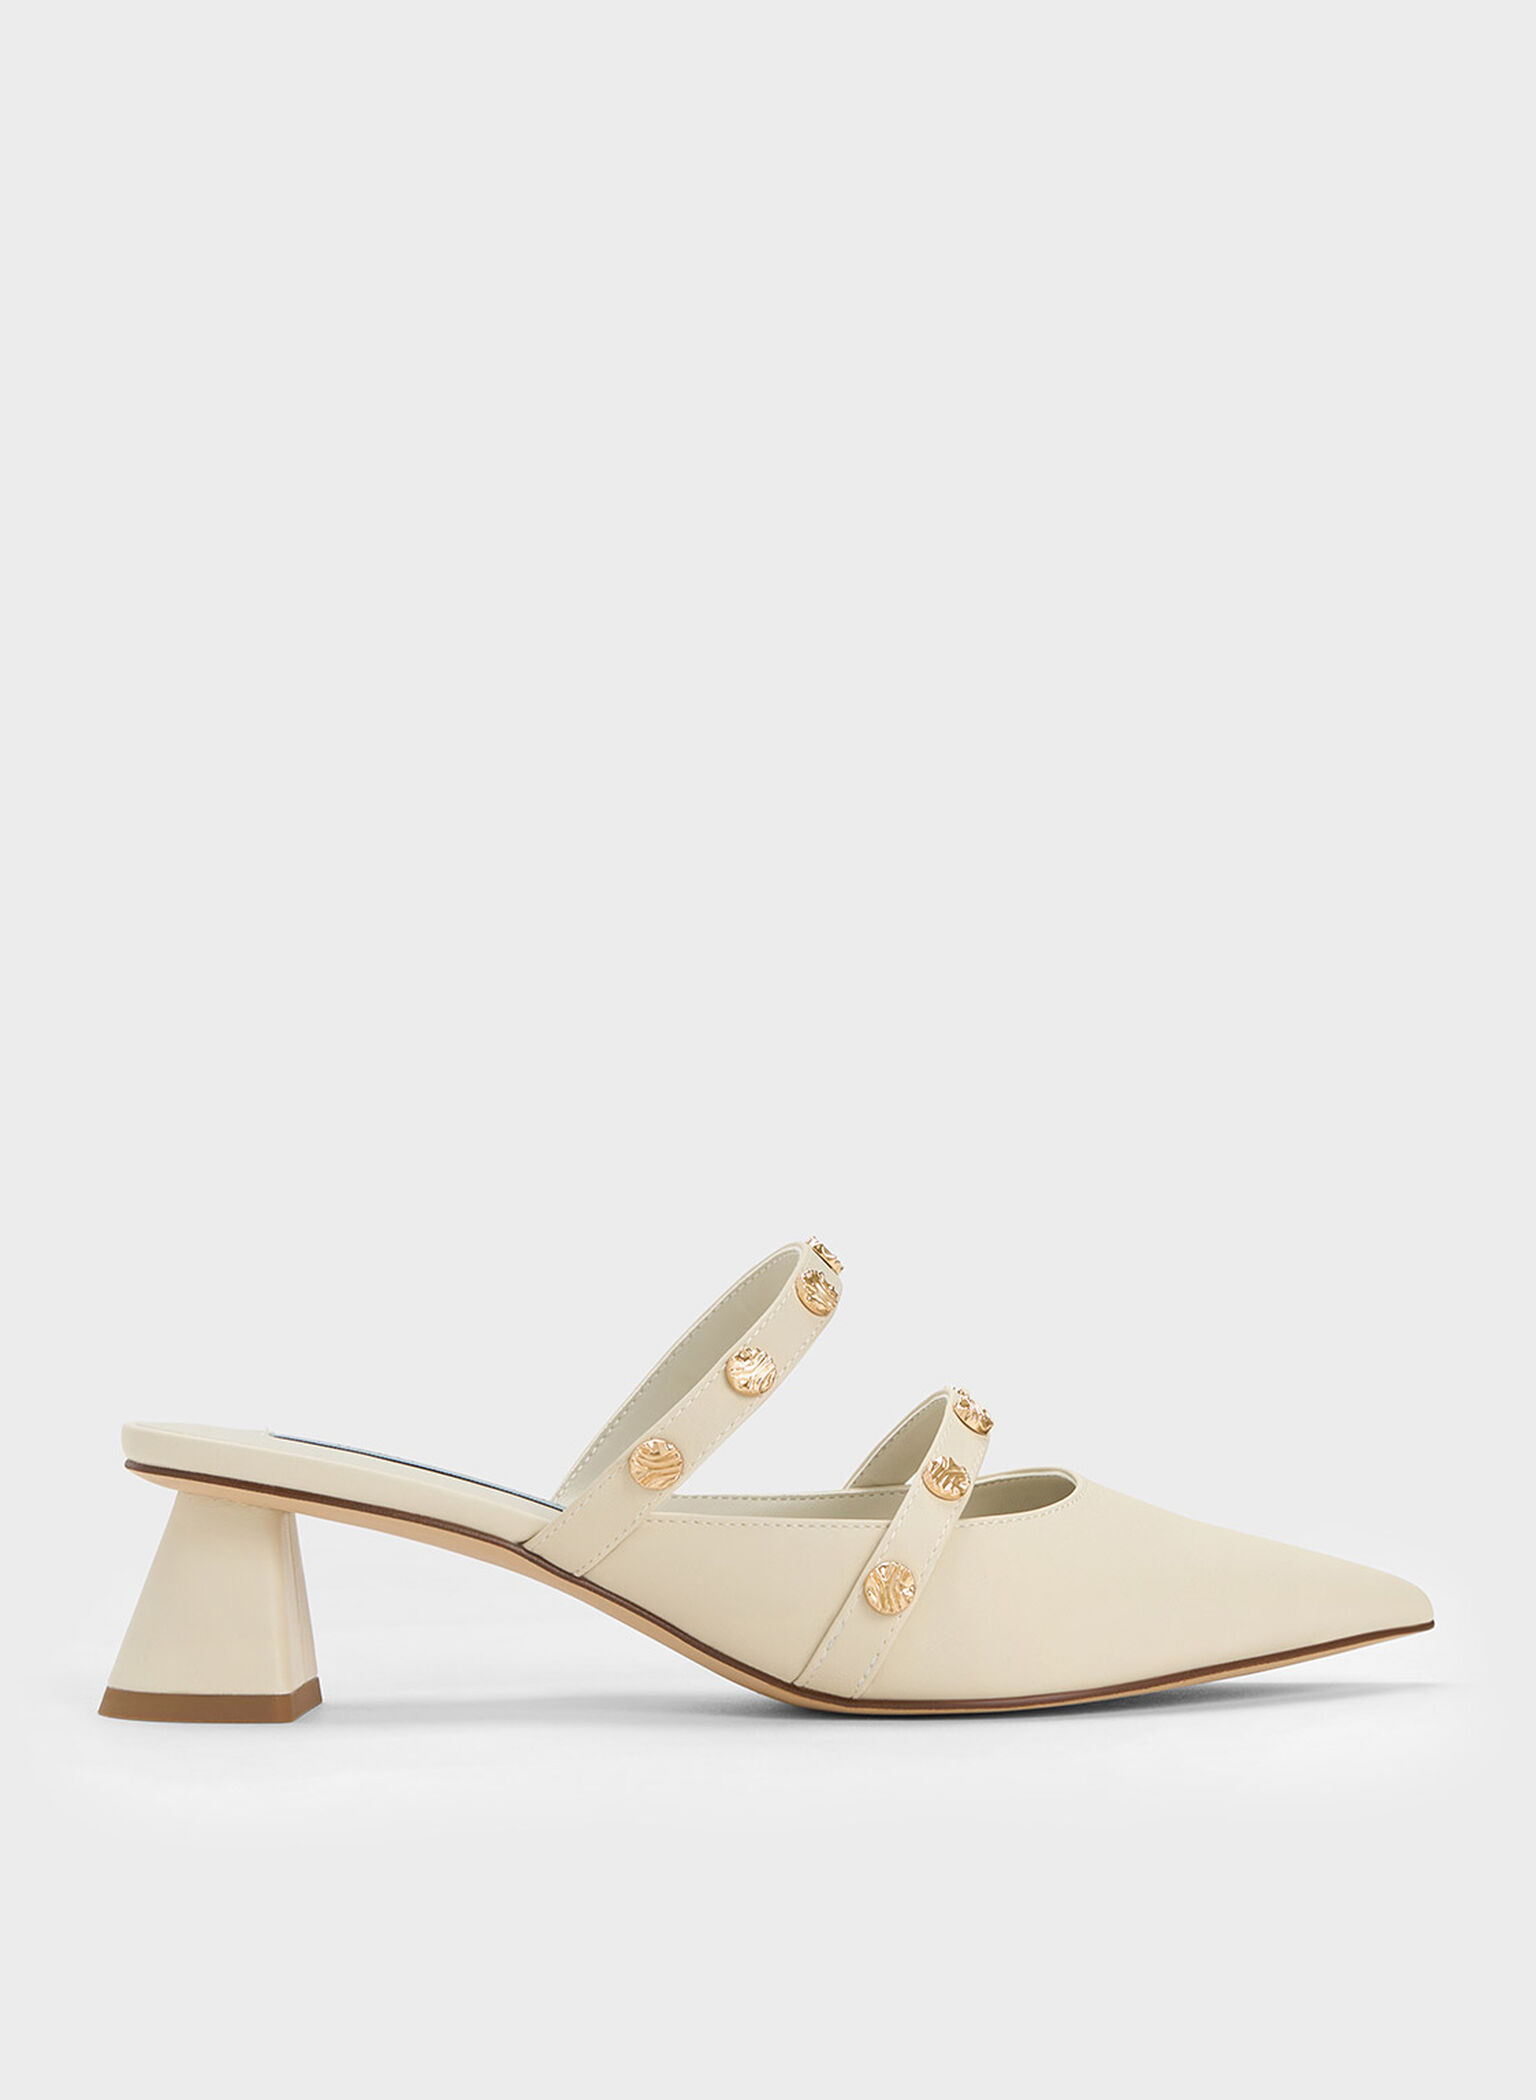 Chalk Studded Trapeze Heel Mules - CHARLES & KEITH MY